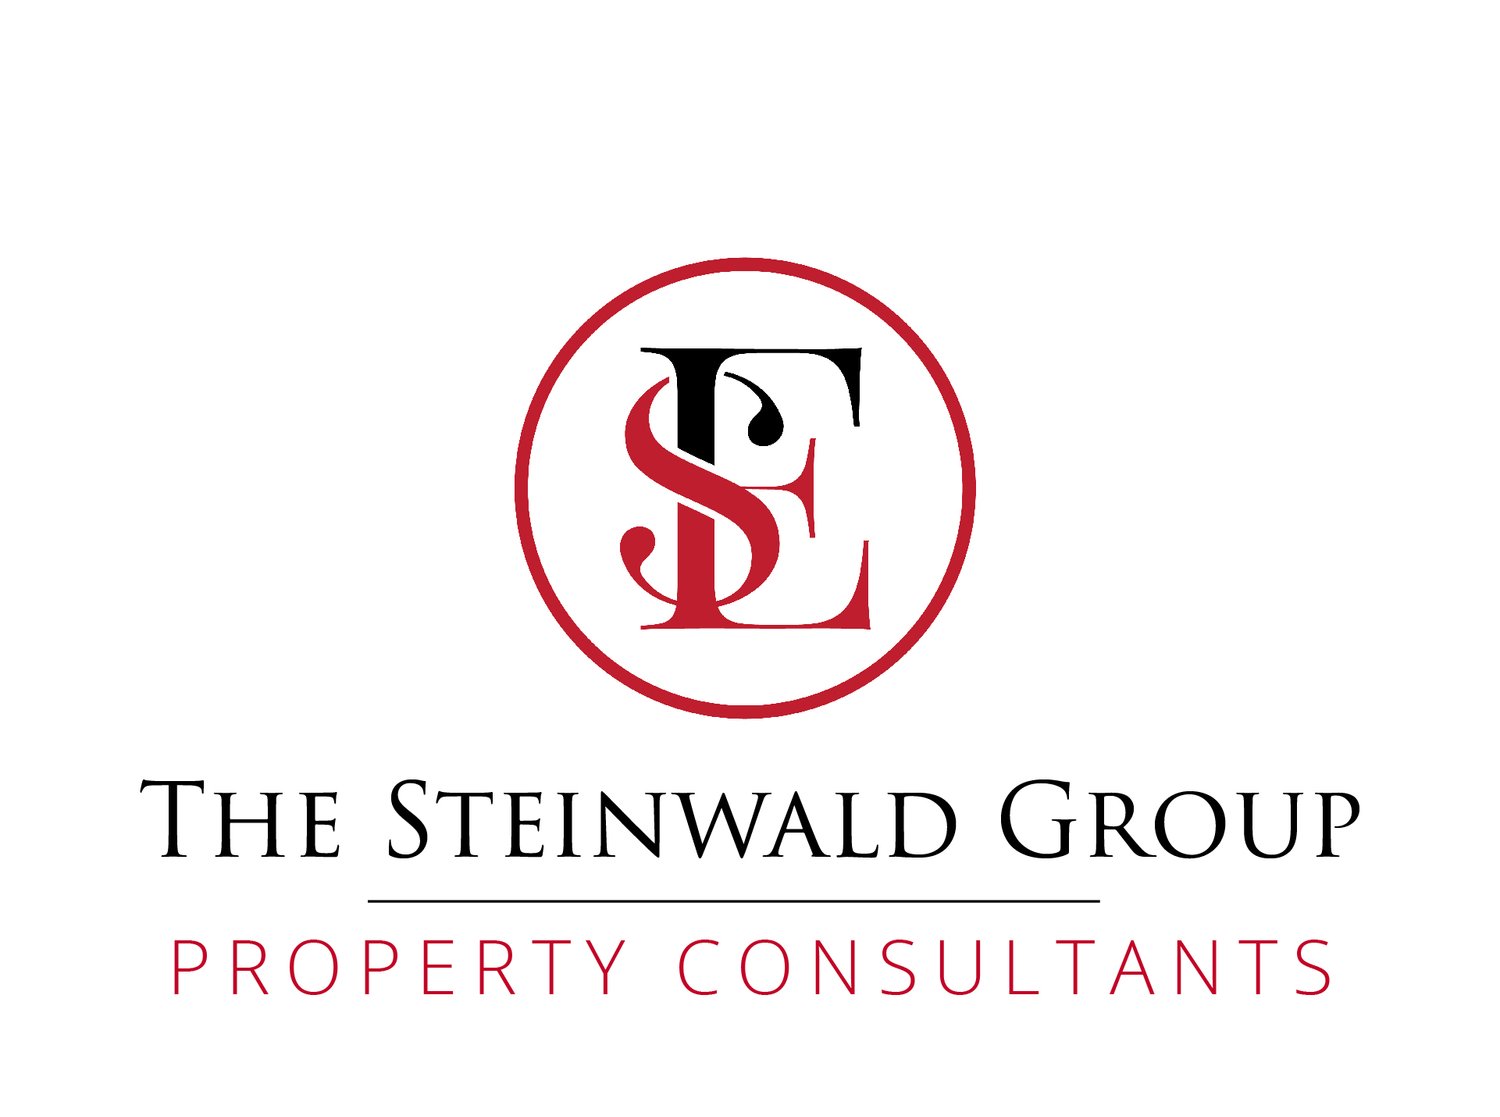 The Steinwald Group